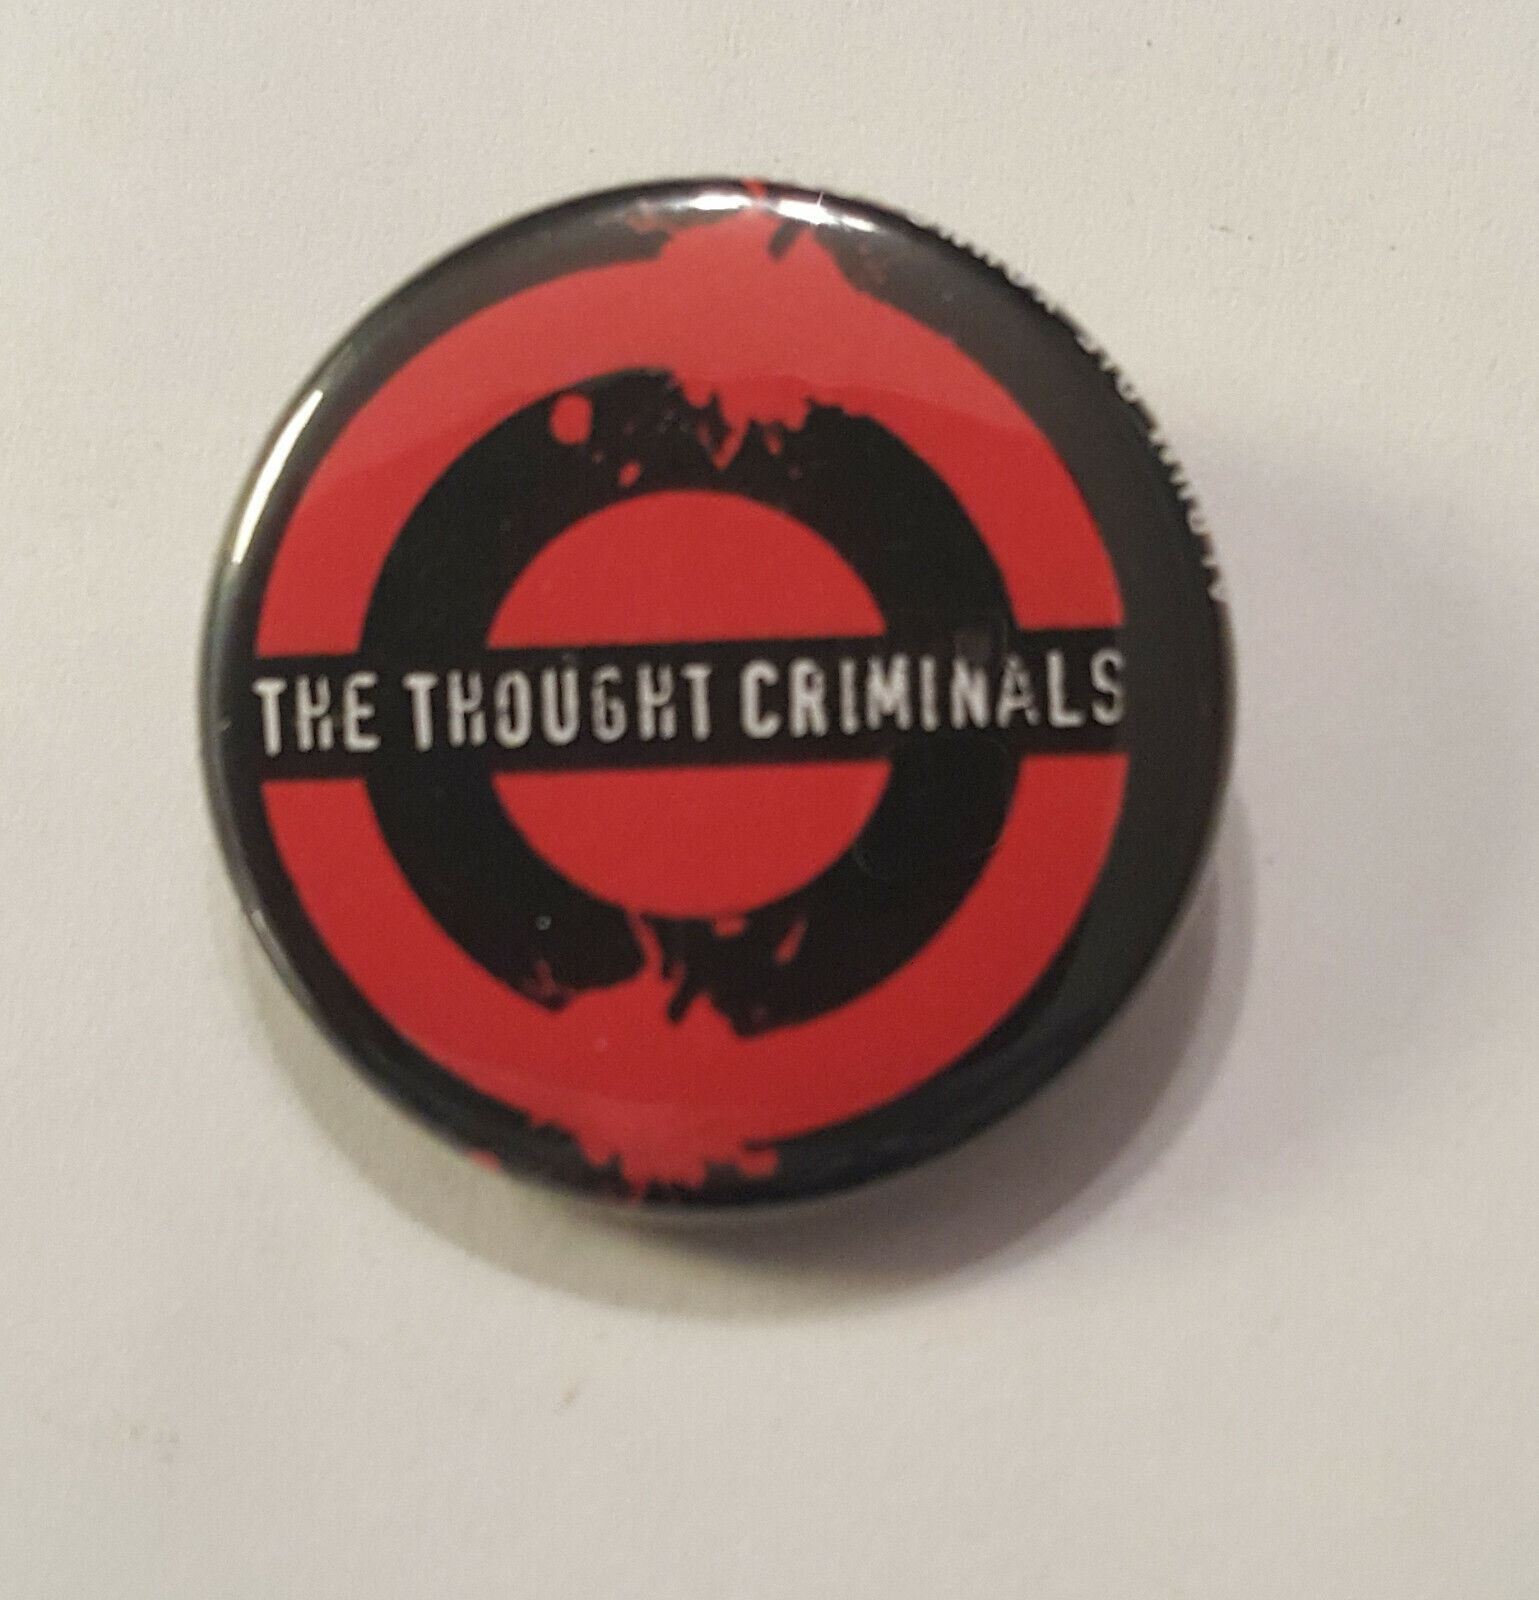 THE THOUGHT CRIMINALS Pinback Rare 1.25 Button ELECTRONIC WAX TRAX SYNTH